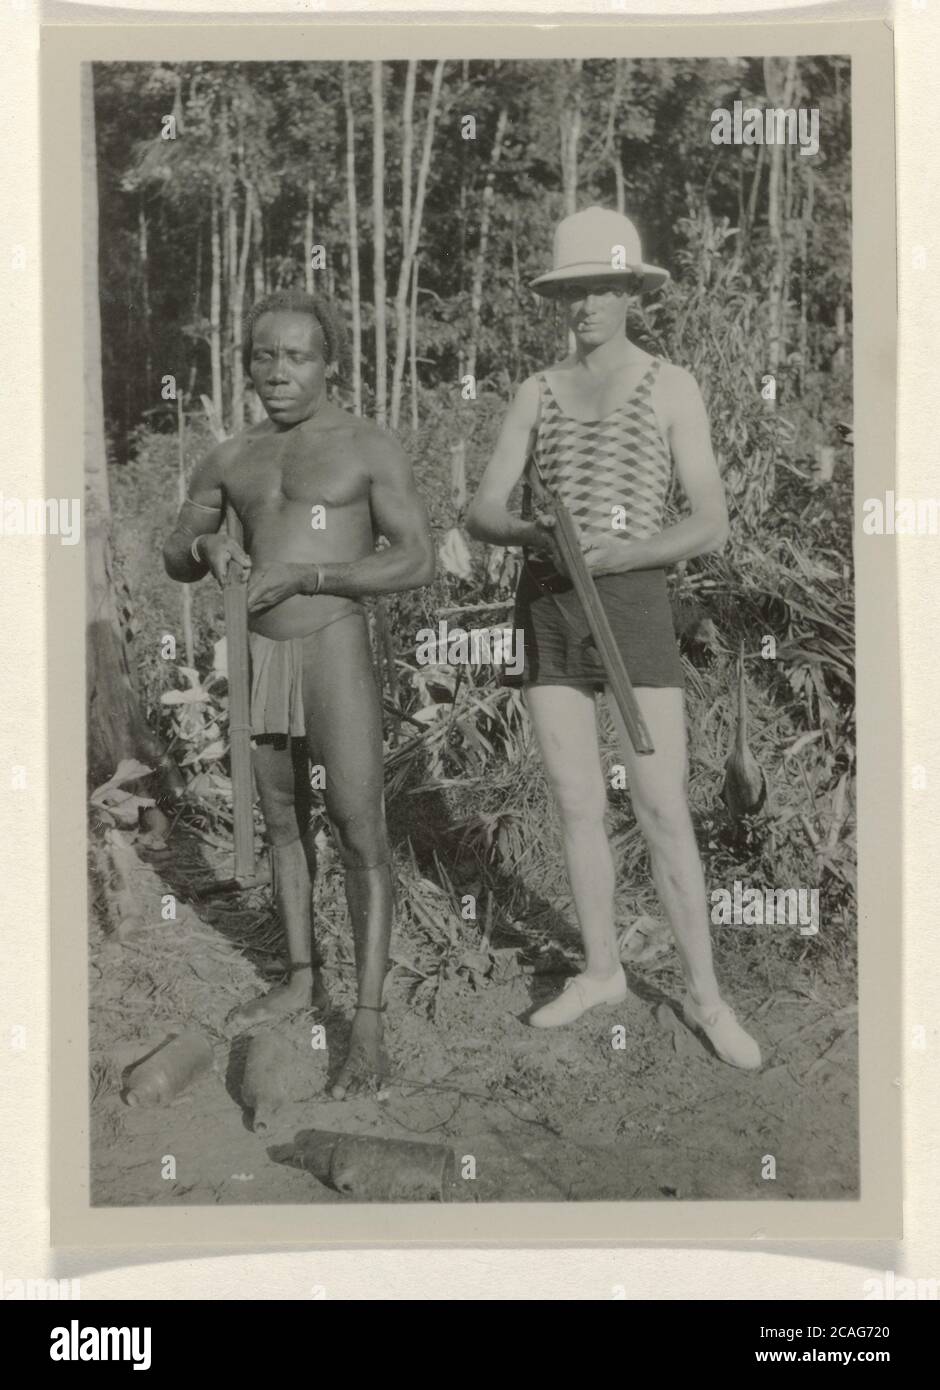 Dutch Man and Surinamese Man are Getting Ready for the Hunt, anonymous, 1929 - 1930 Stock Photo